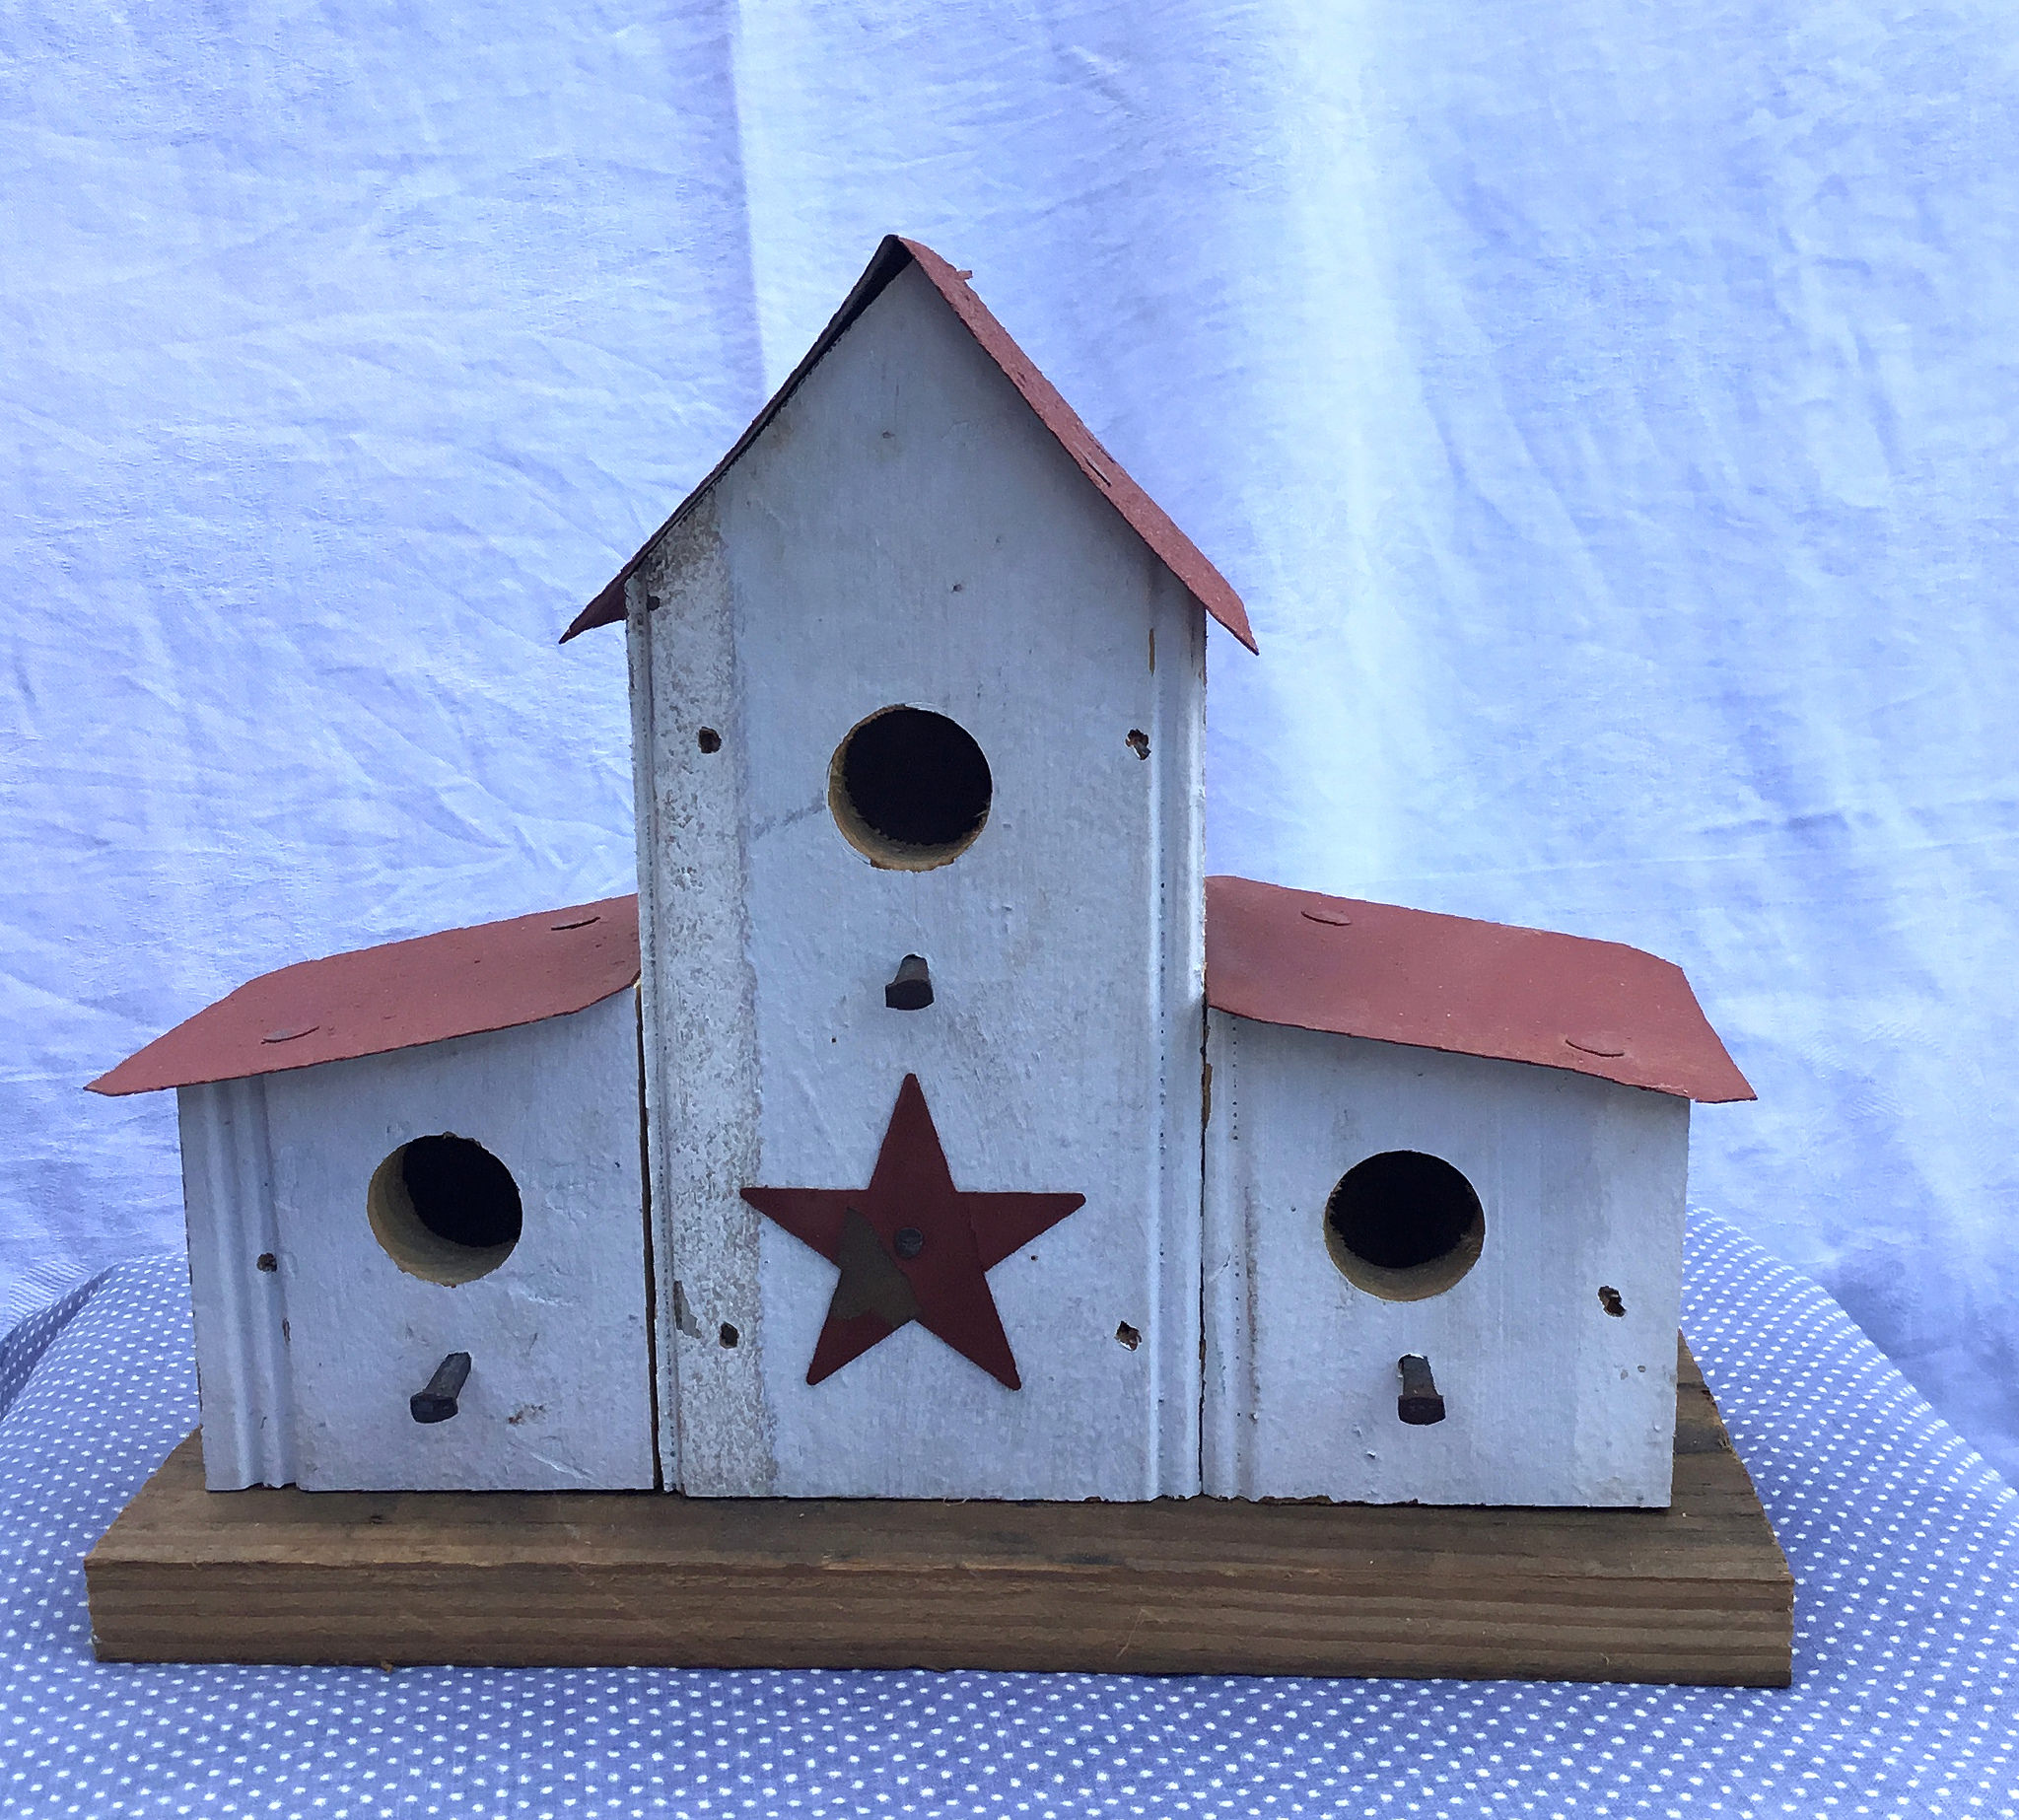 Barn Wood Small Double Lean-To Bird House - image 2 of 2